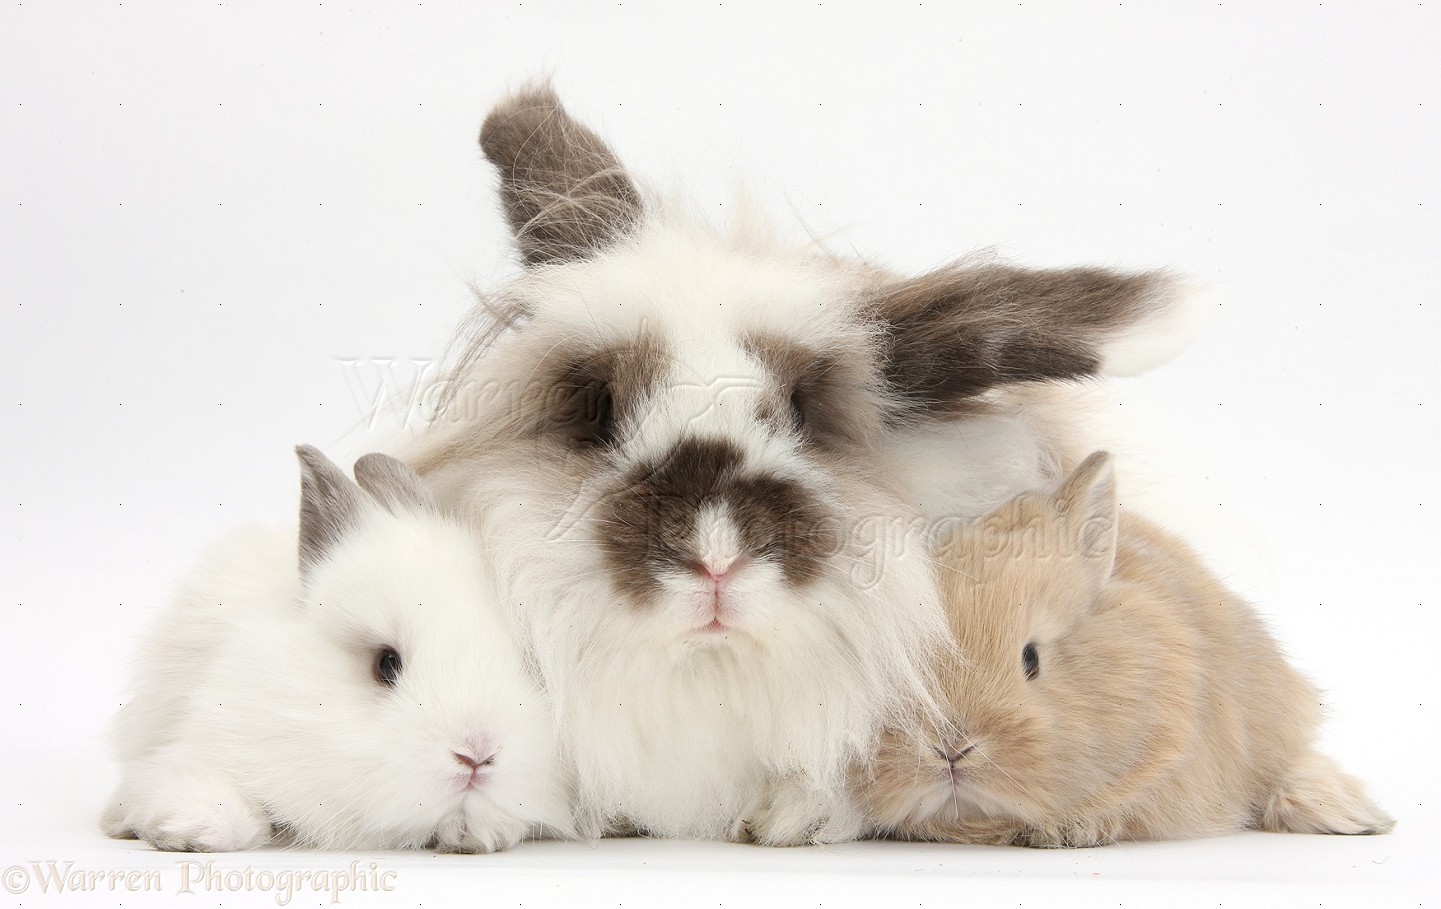 Fluffy rabbit and baby bunnies photo WP36023